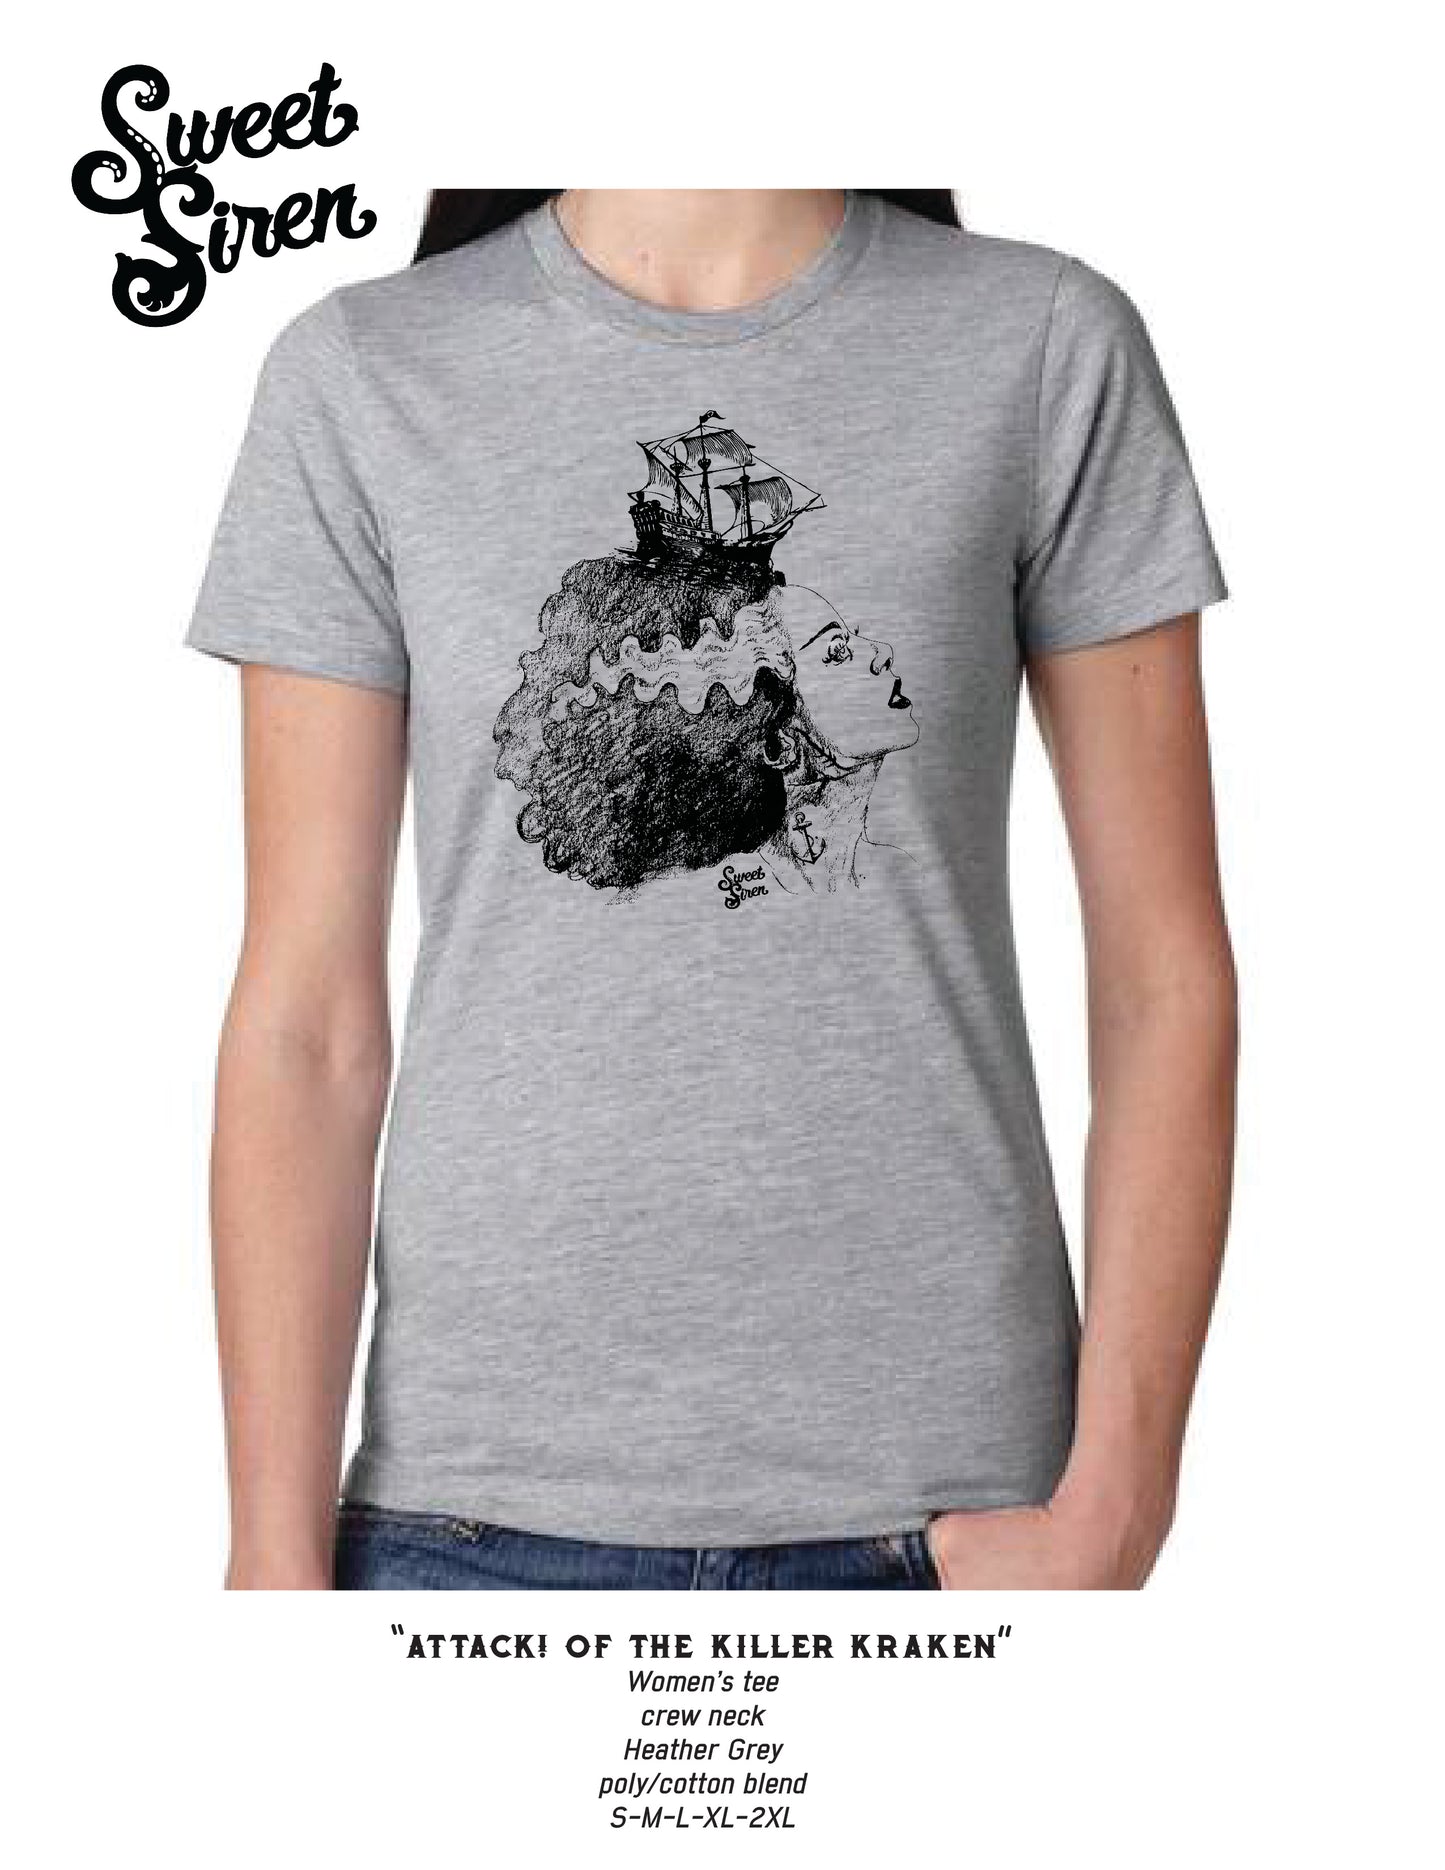 Bride with Ship - Women's Tee - SALE